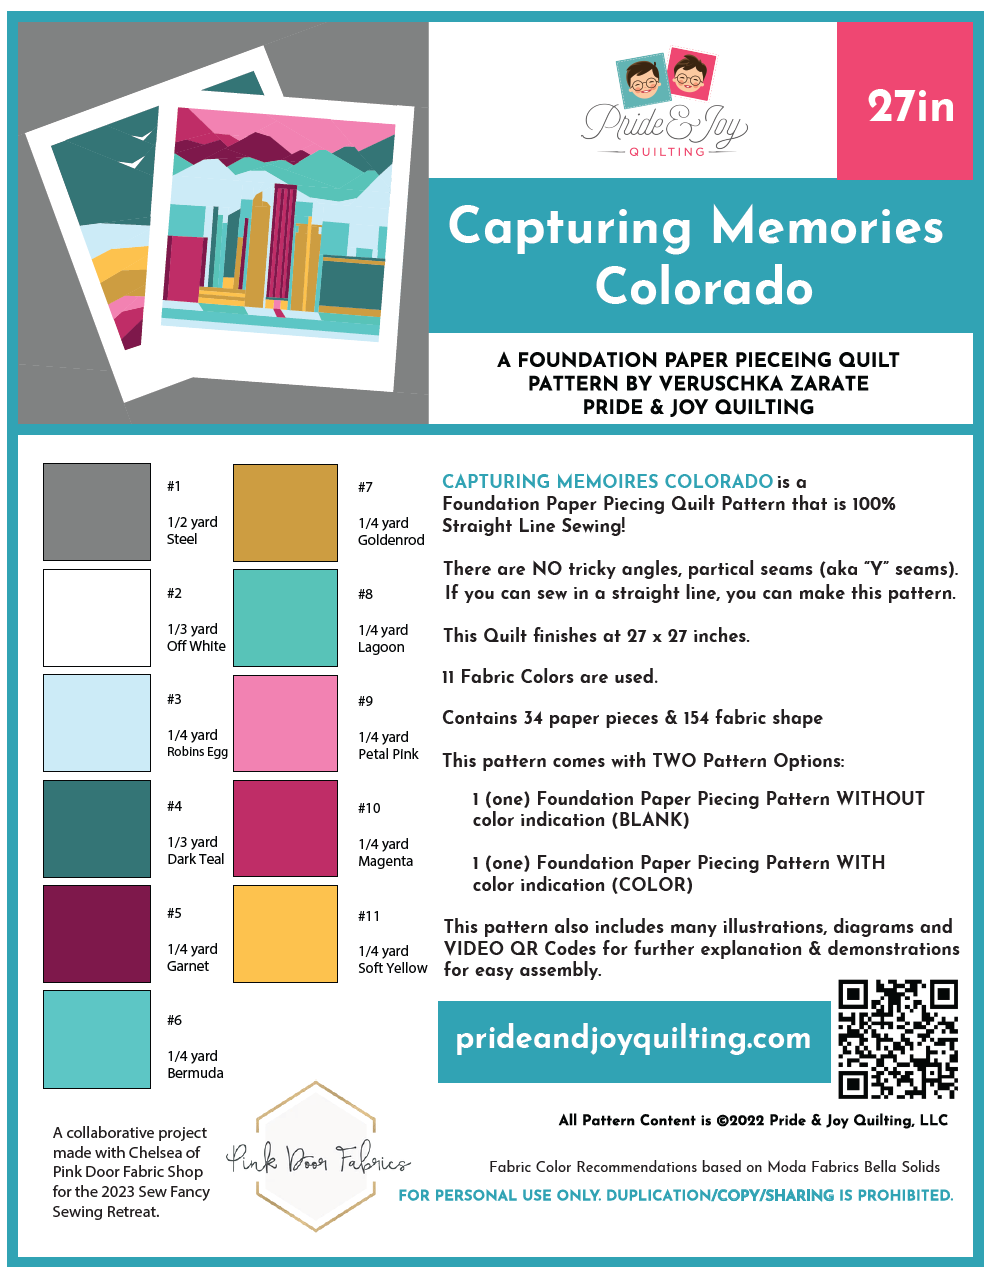 PDF (Part 2 of 9) Capturing Memories COLORADO, A Foundation Paper Piecing Quilt Pattern Series